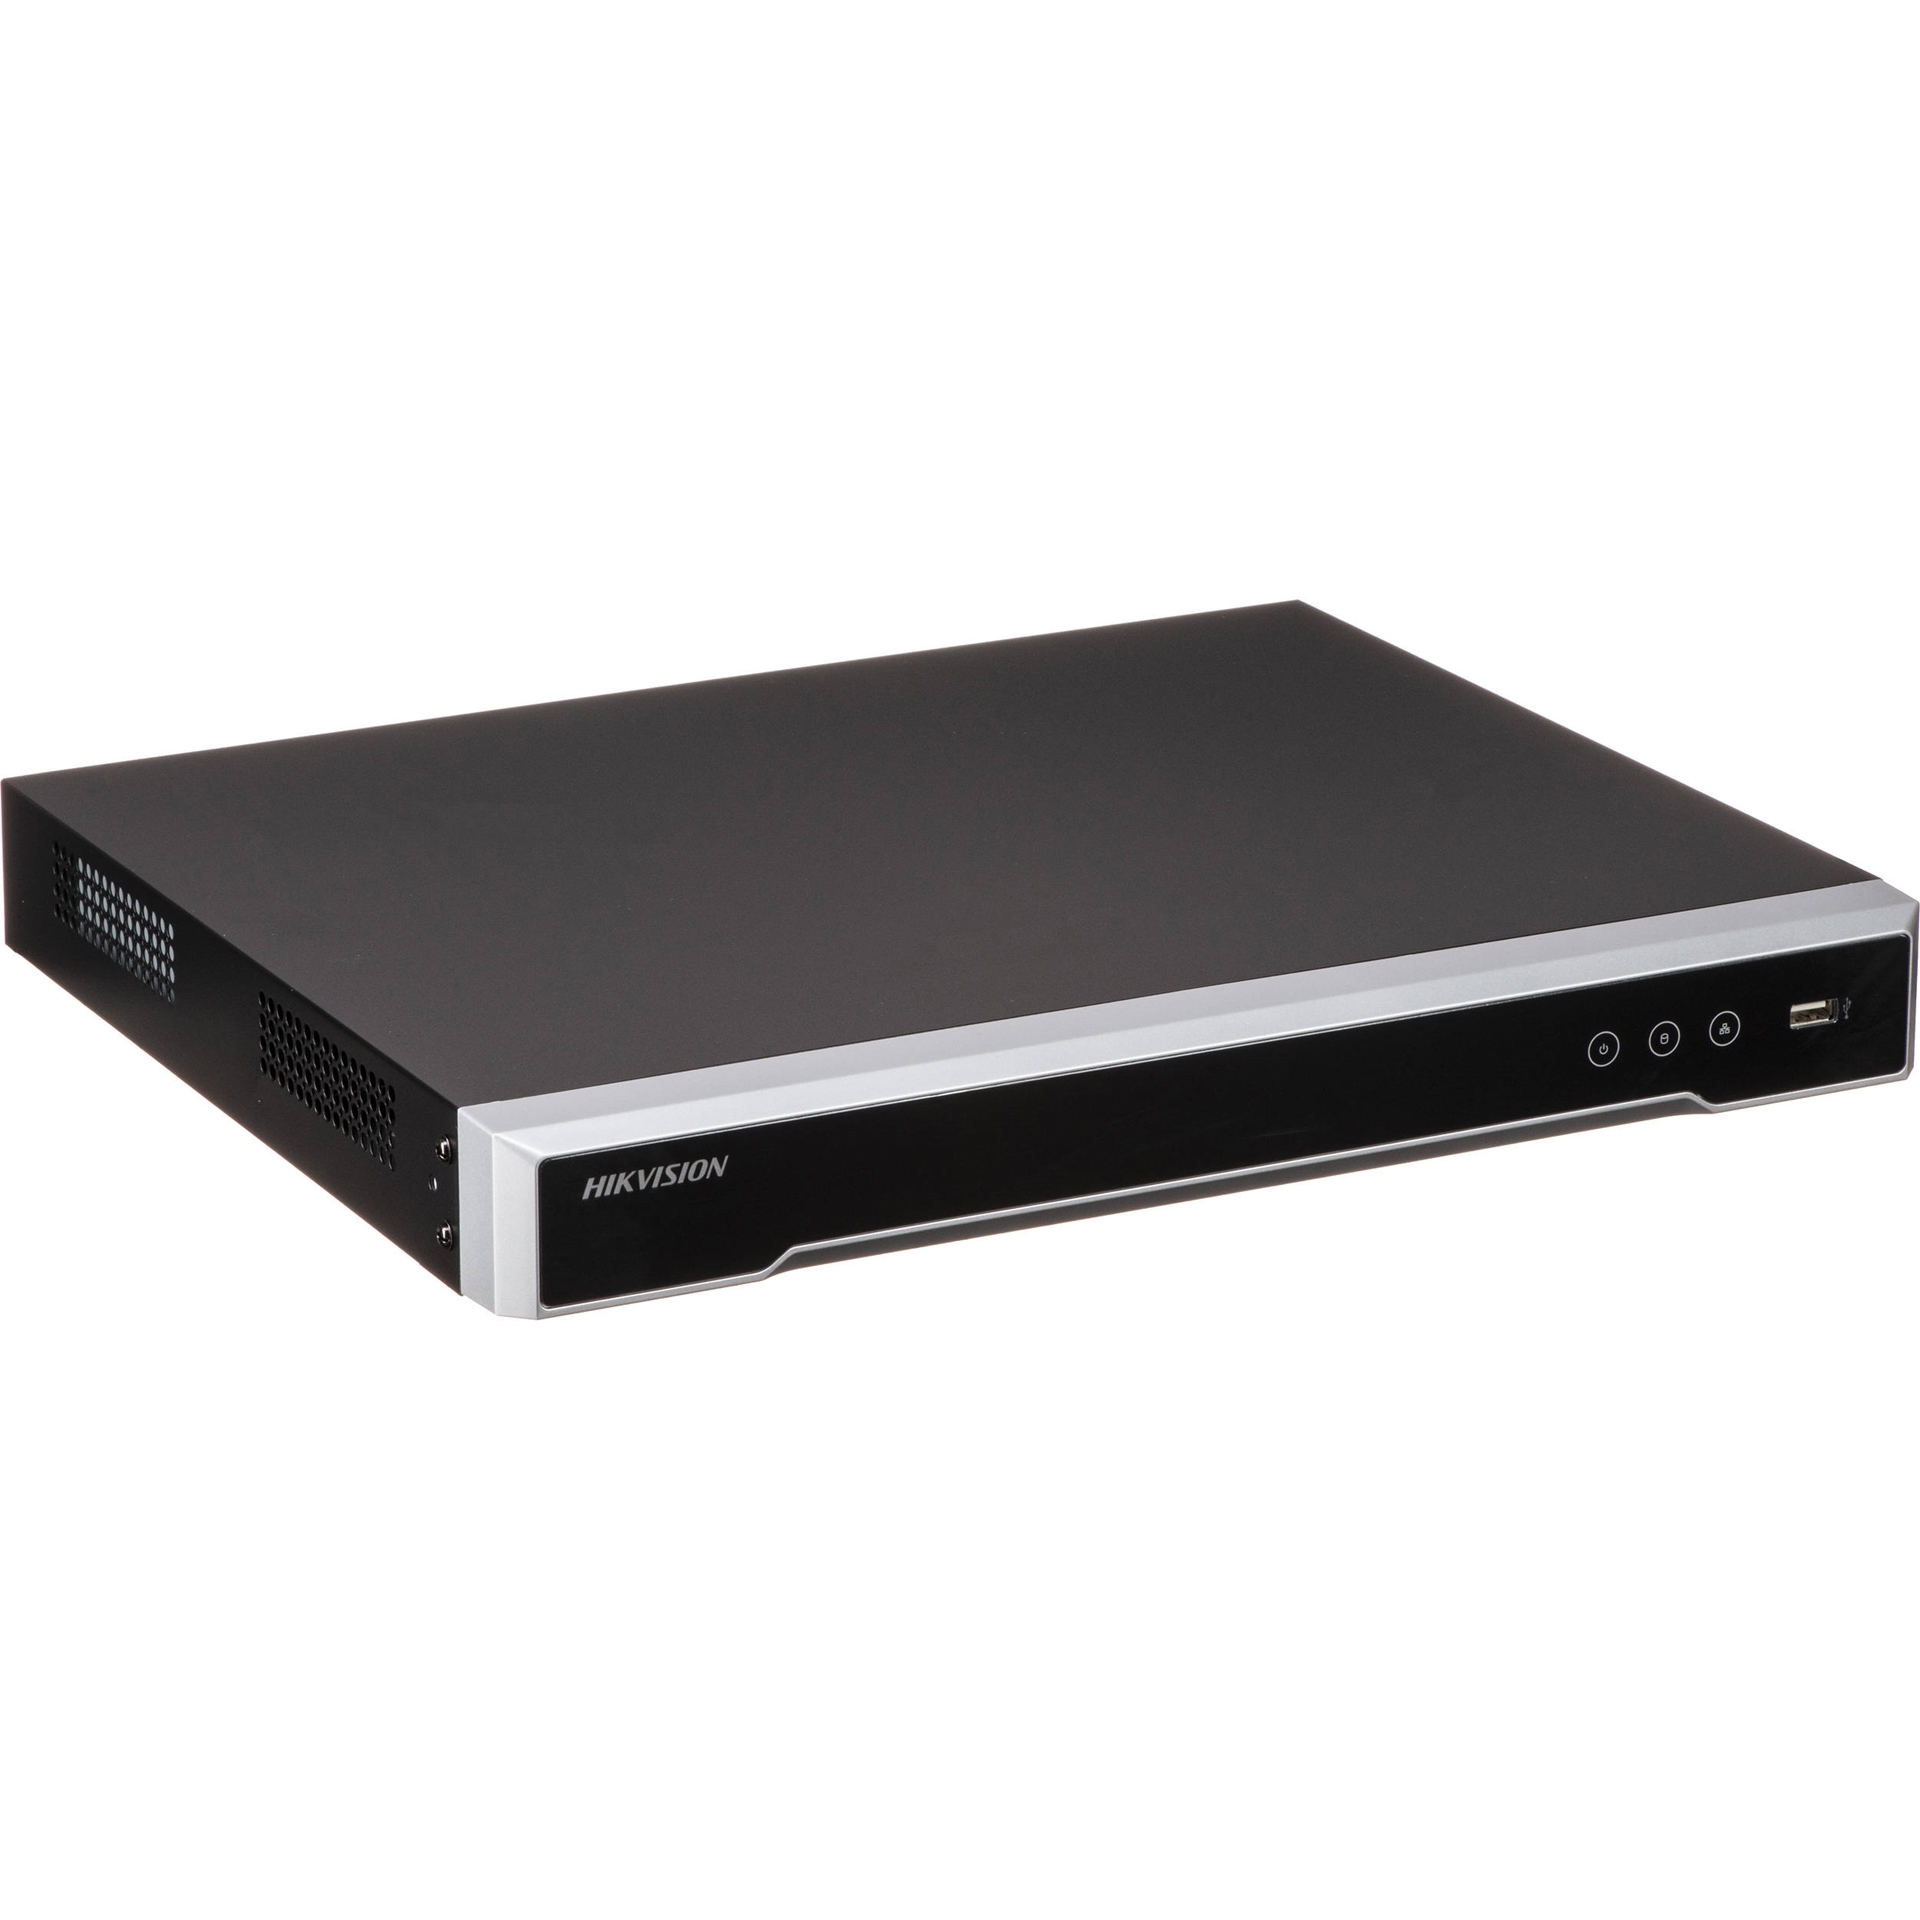 Picture of DS-7608NI-K2/4G  NVR 8Ch 4G Access Series Hikvision